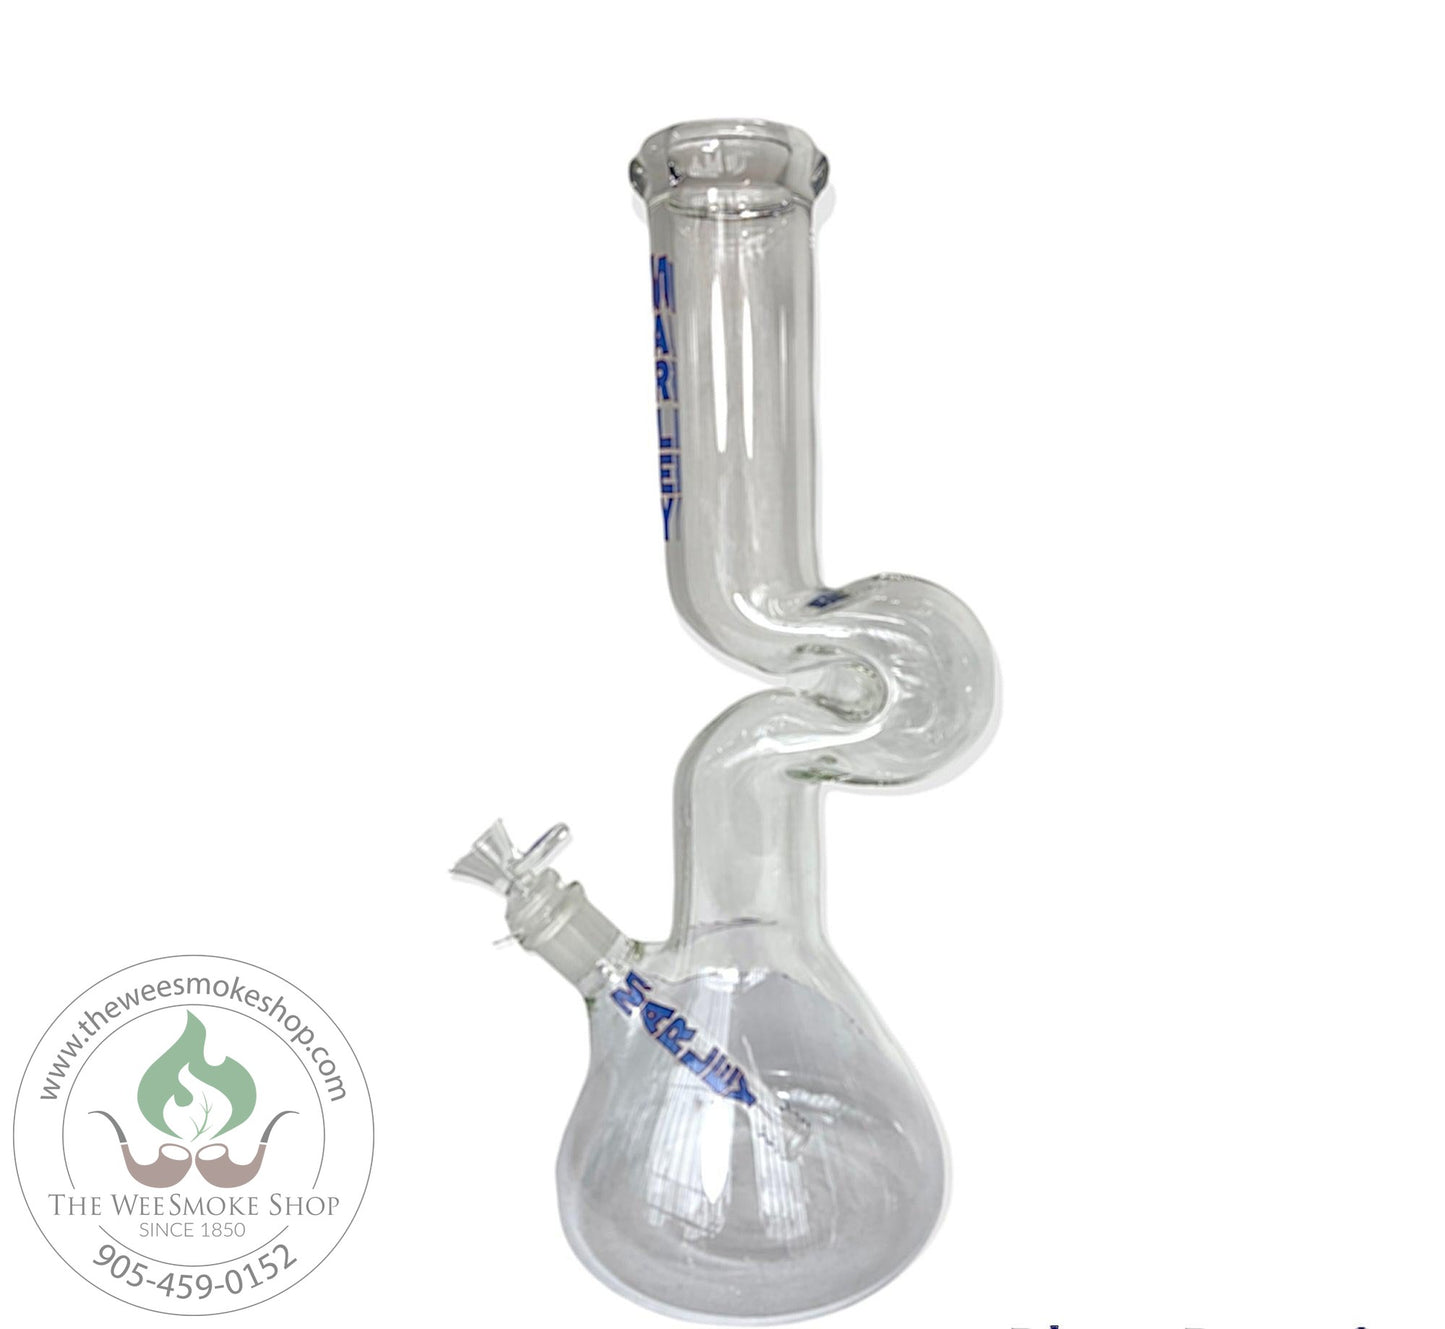 Blue Marley 14" One Tier Rounded Bottom Zong - Glass Bong - The Wee Smoke Shop